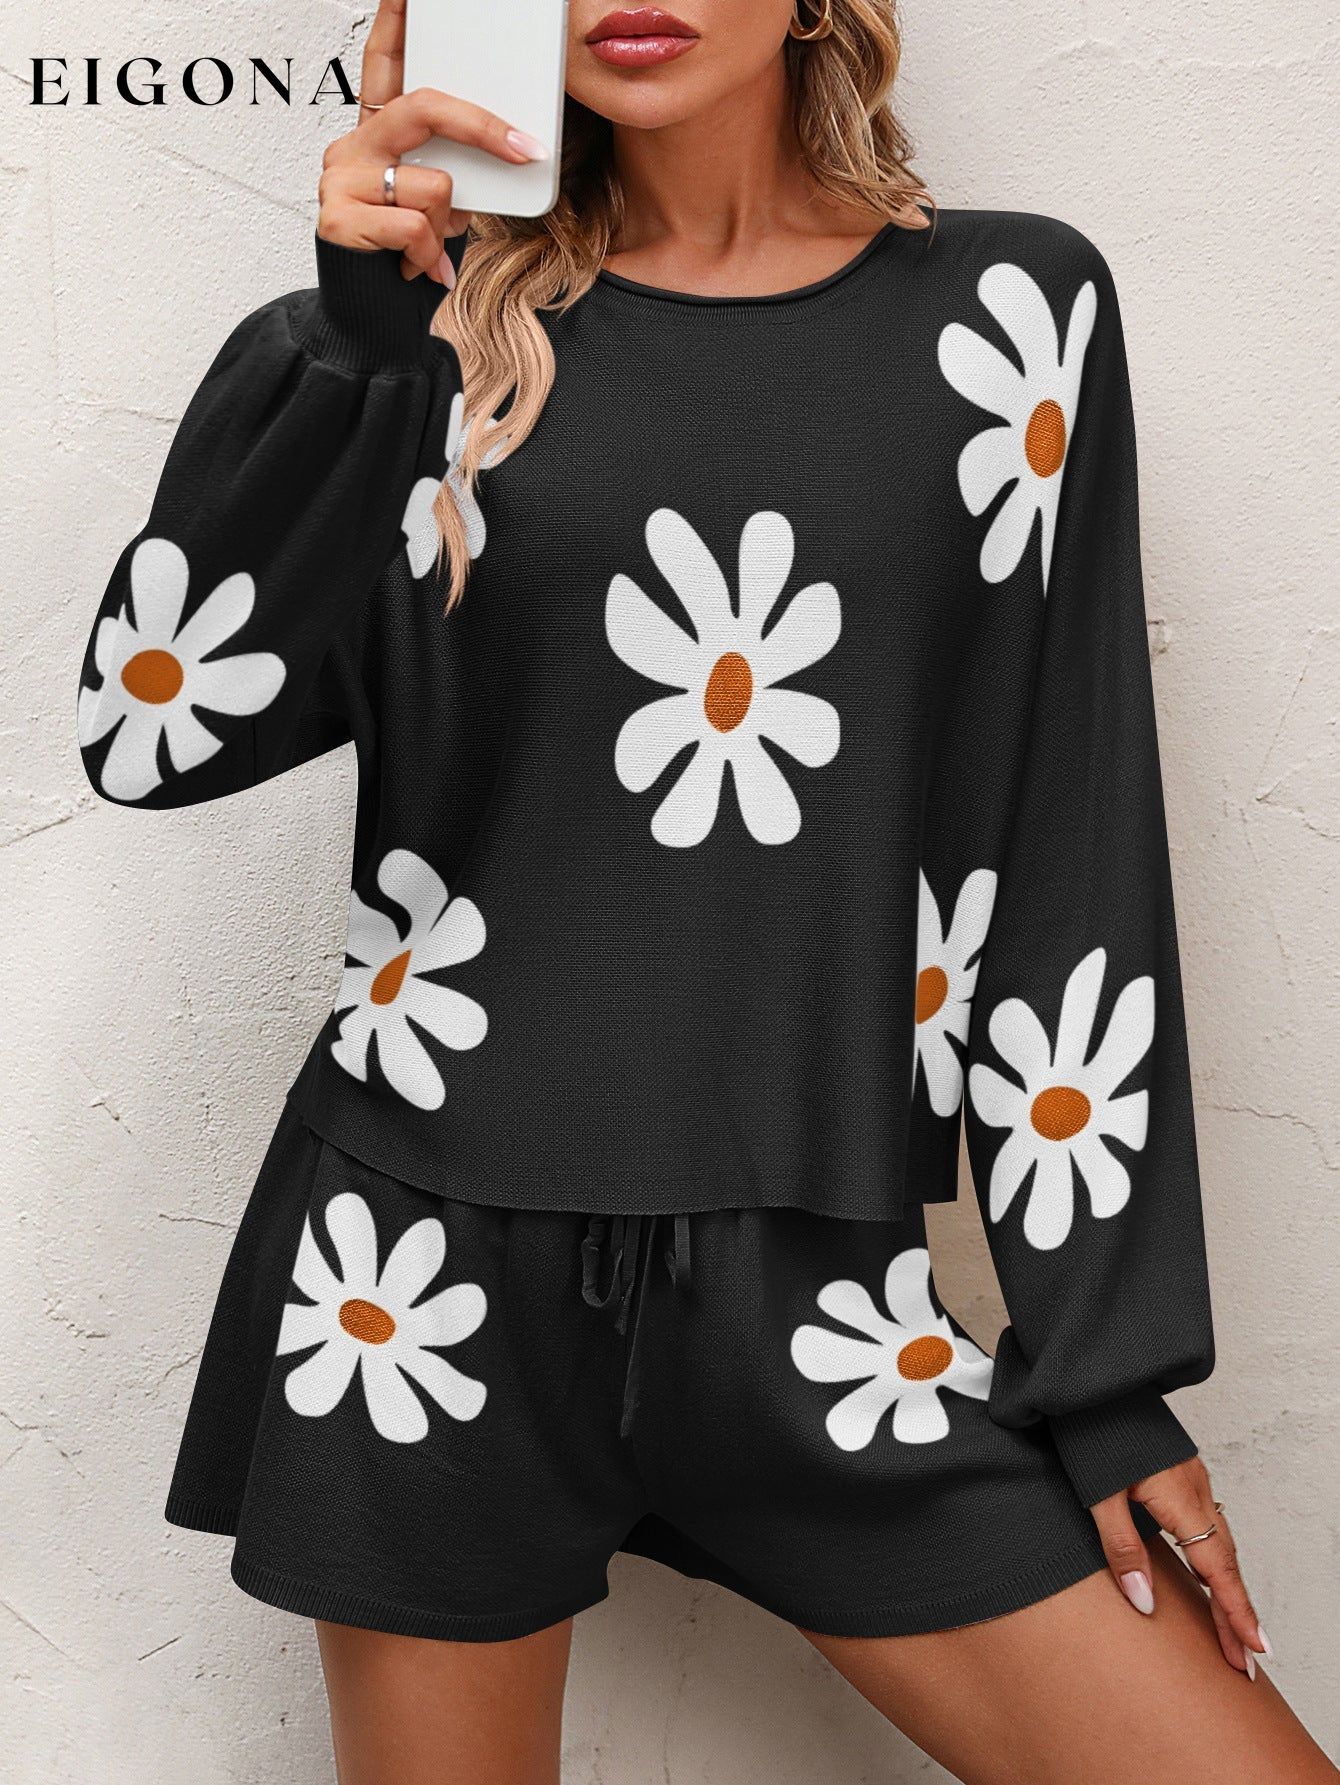 Floral Print Raglan Sleeve Knit Top and Tie Front Sweater Shorts Set Black clothes lounge lounge wear loungewear Mandy sets Ship From Overseas trend